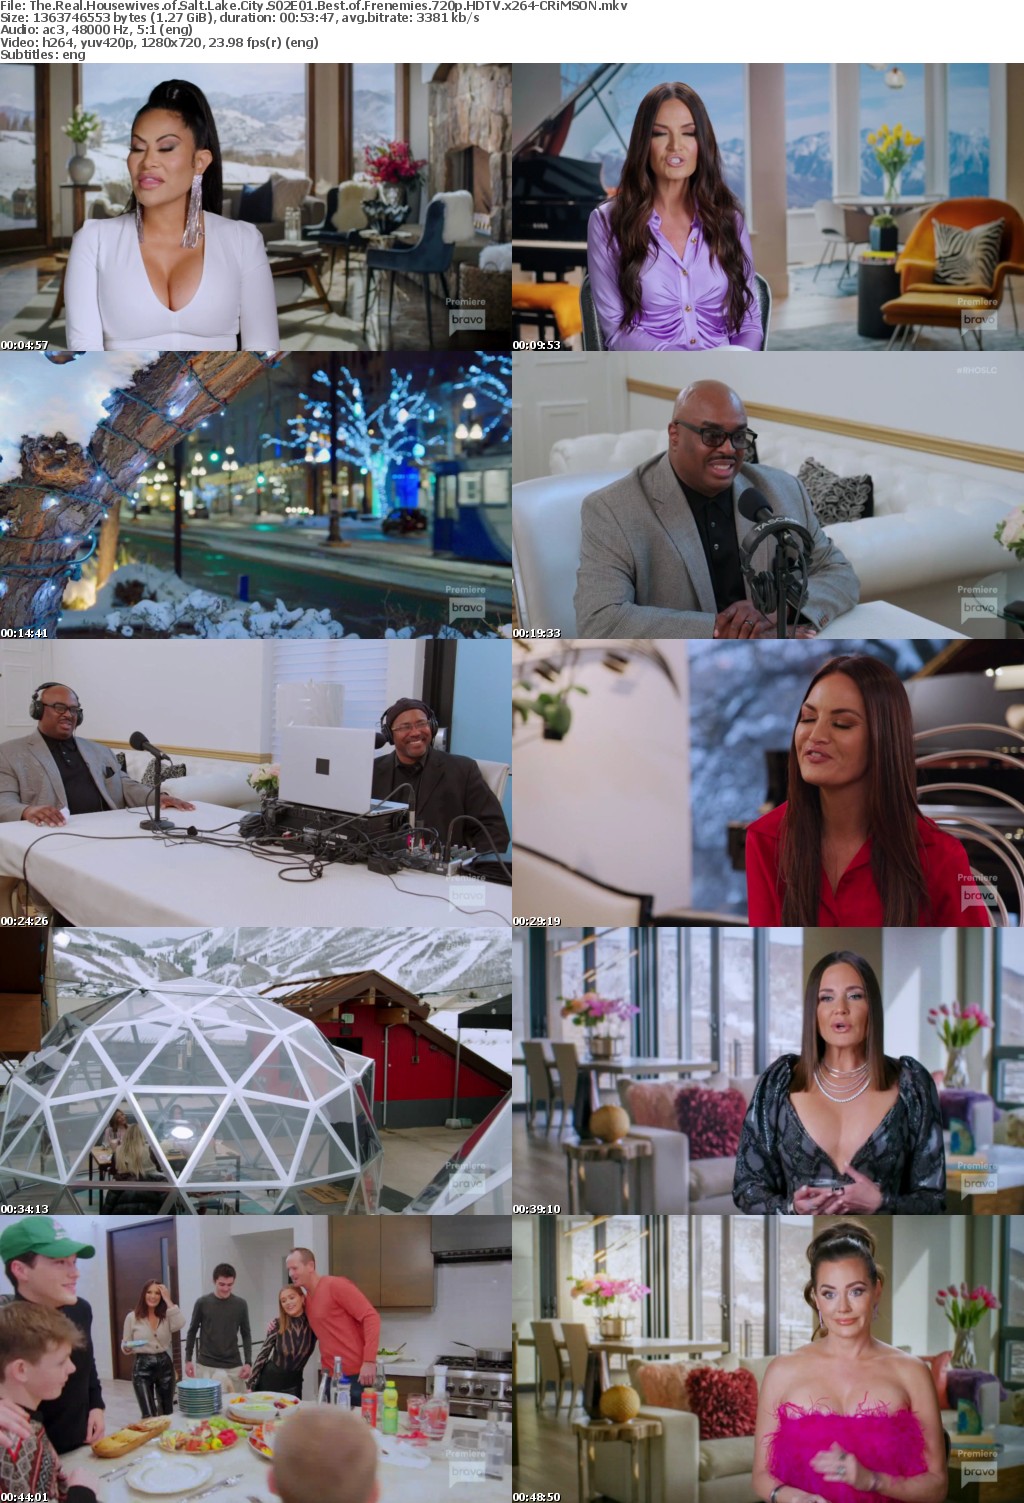 The Real Housewives of Salt Lake City S02E01 Best of Frenemies 720p HDTV x264-CRiMSON